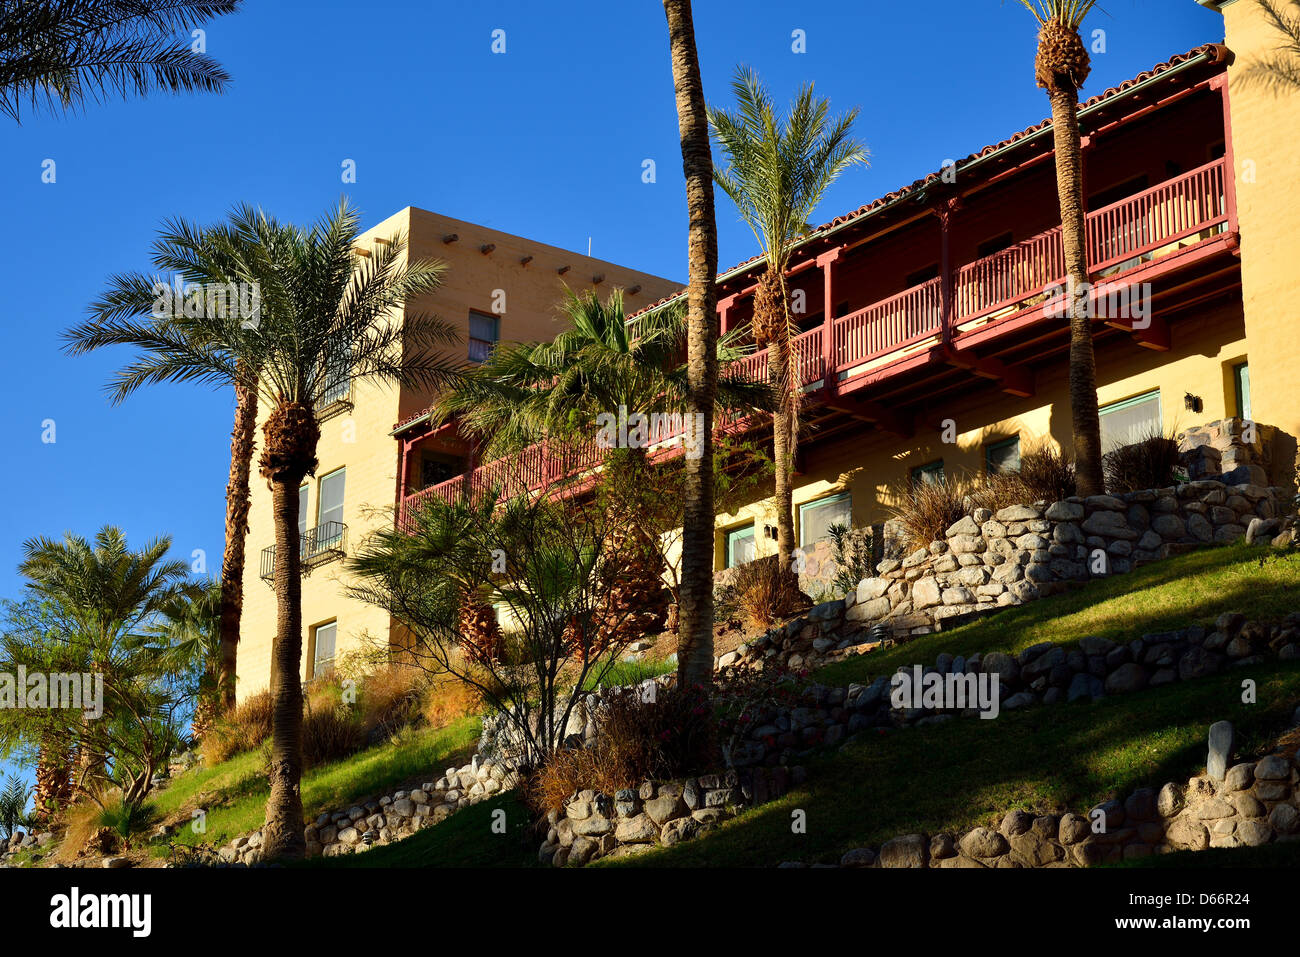 Hotel rooms at the Furnace Creek Inn. Death Valley National Park, California, USA. Stock Photo